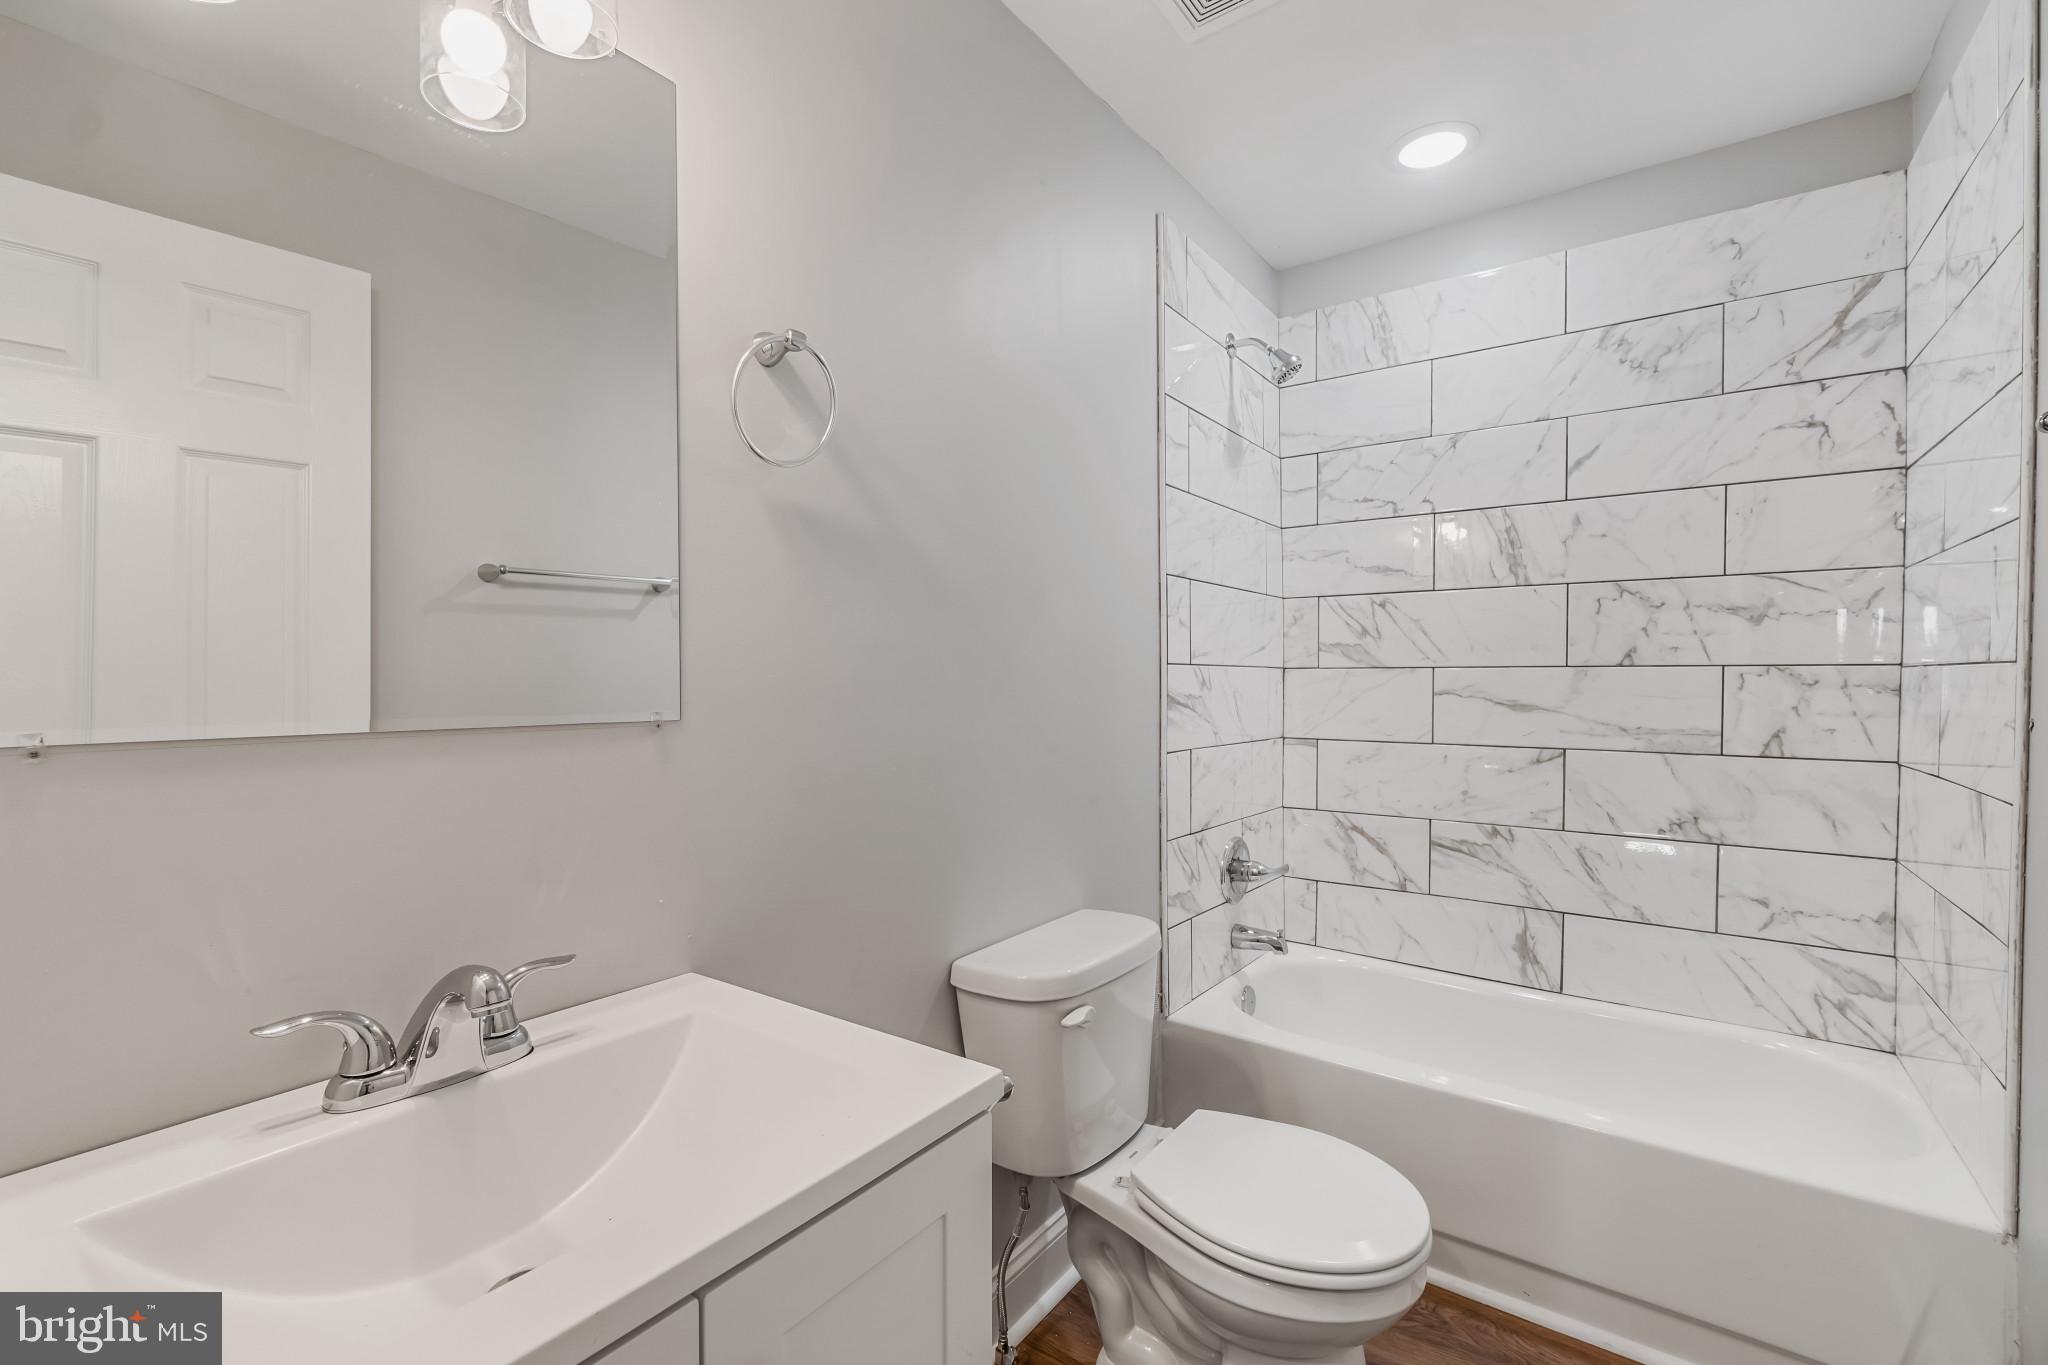 a bathroom with a bathtub shower sink vanity and toilet